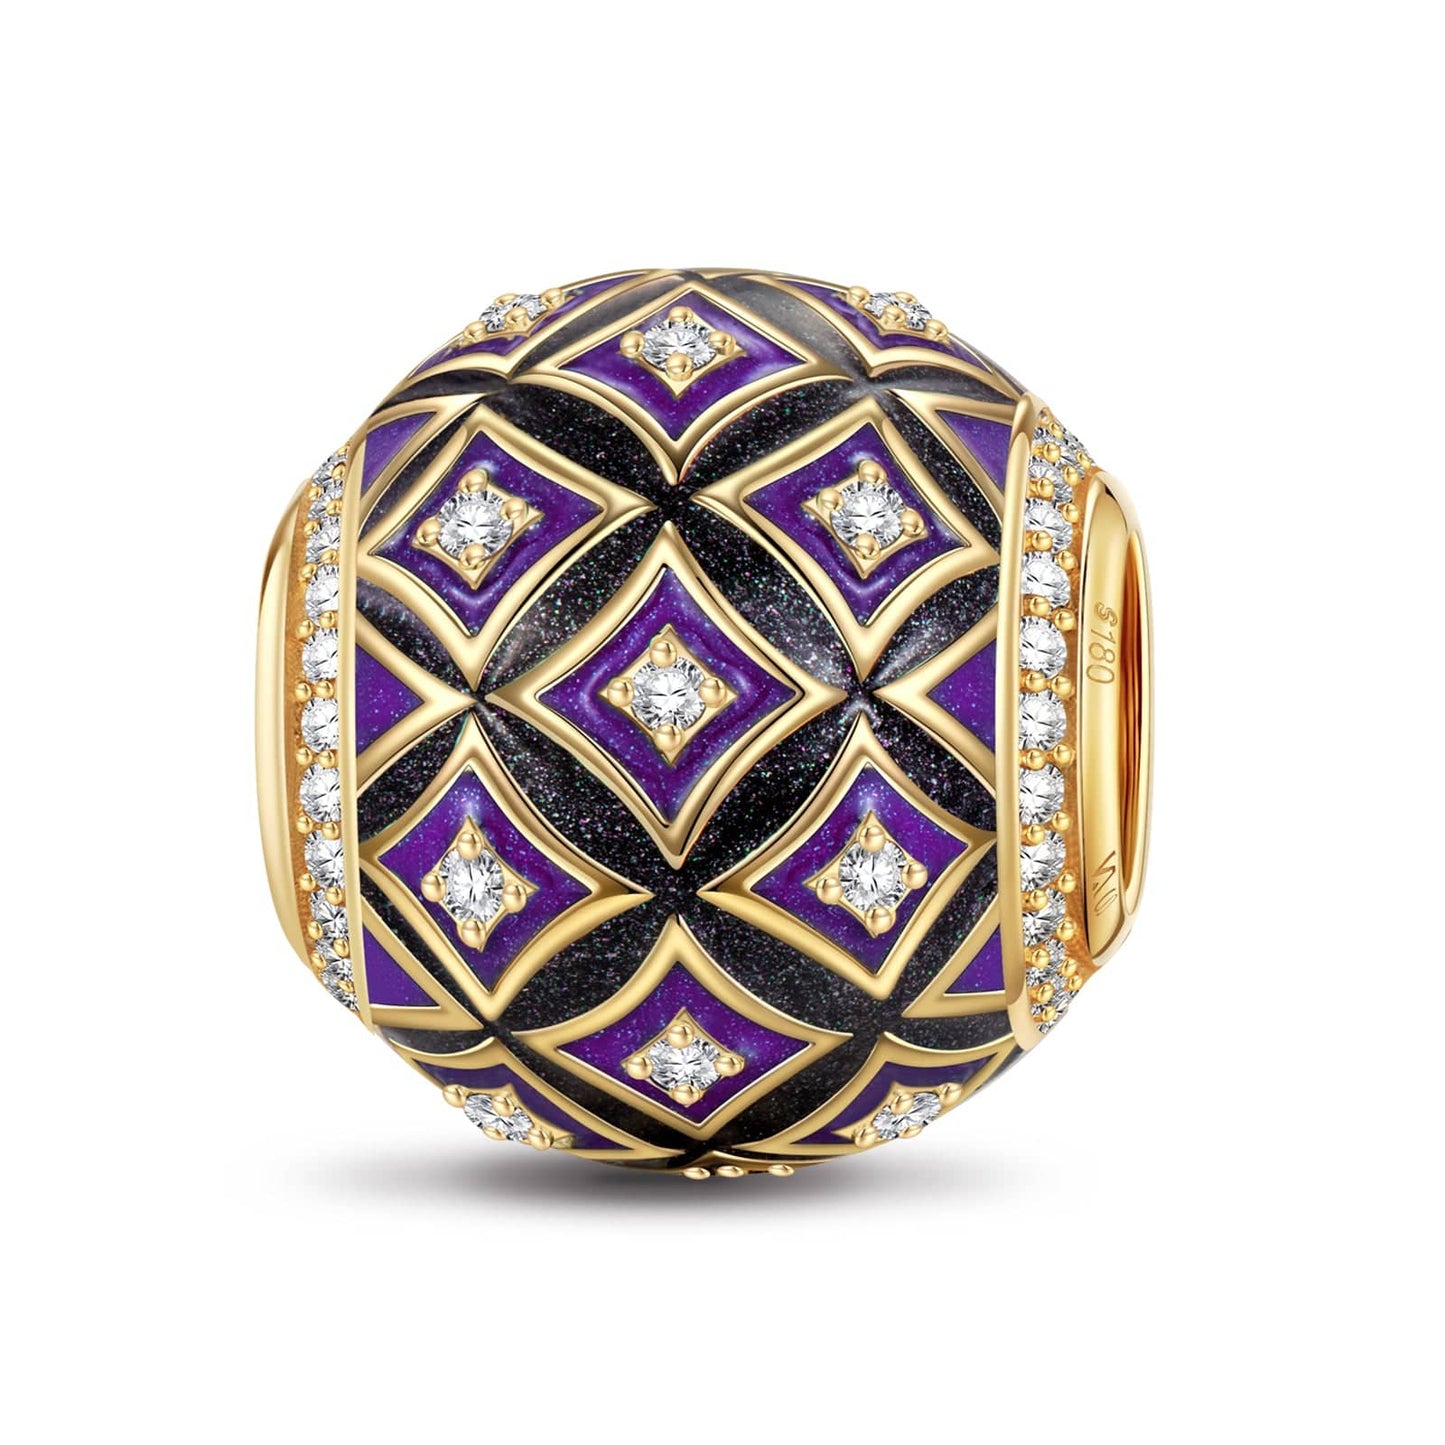 Venetian Diamond Tarnish-resistant Silver Charms With Enamel In 14K Gold Plated